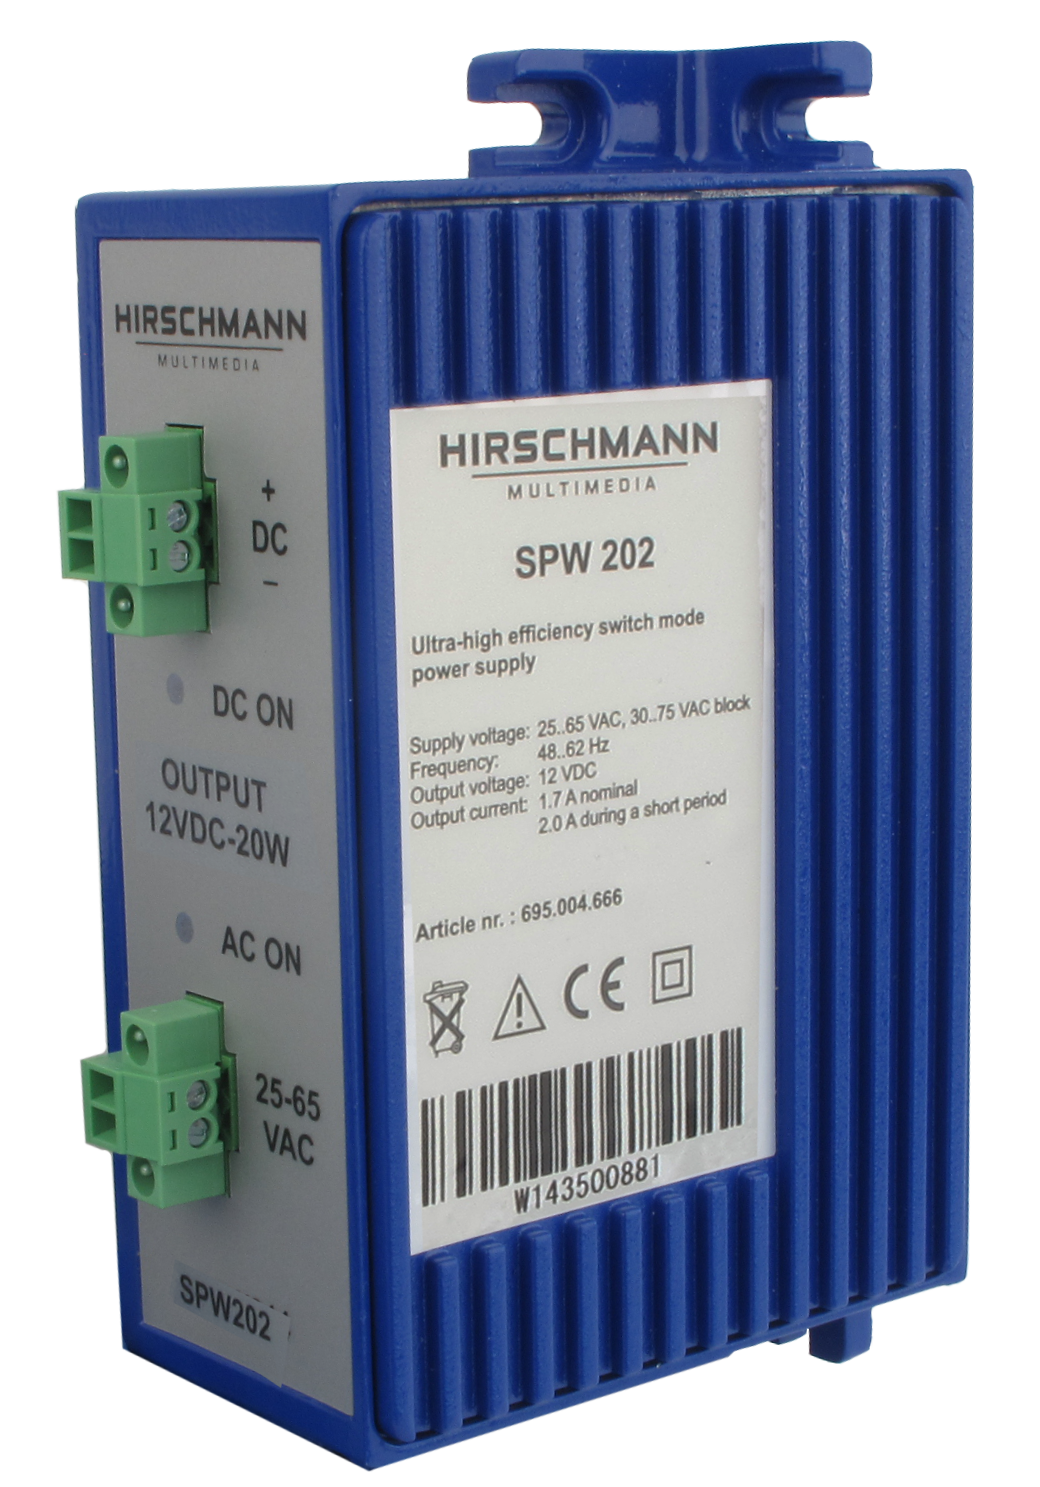 Hirschmann SPW202 Article number 695004666 switch mode power supply